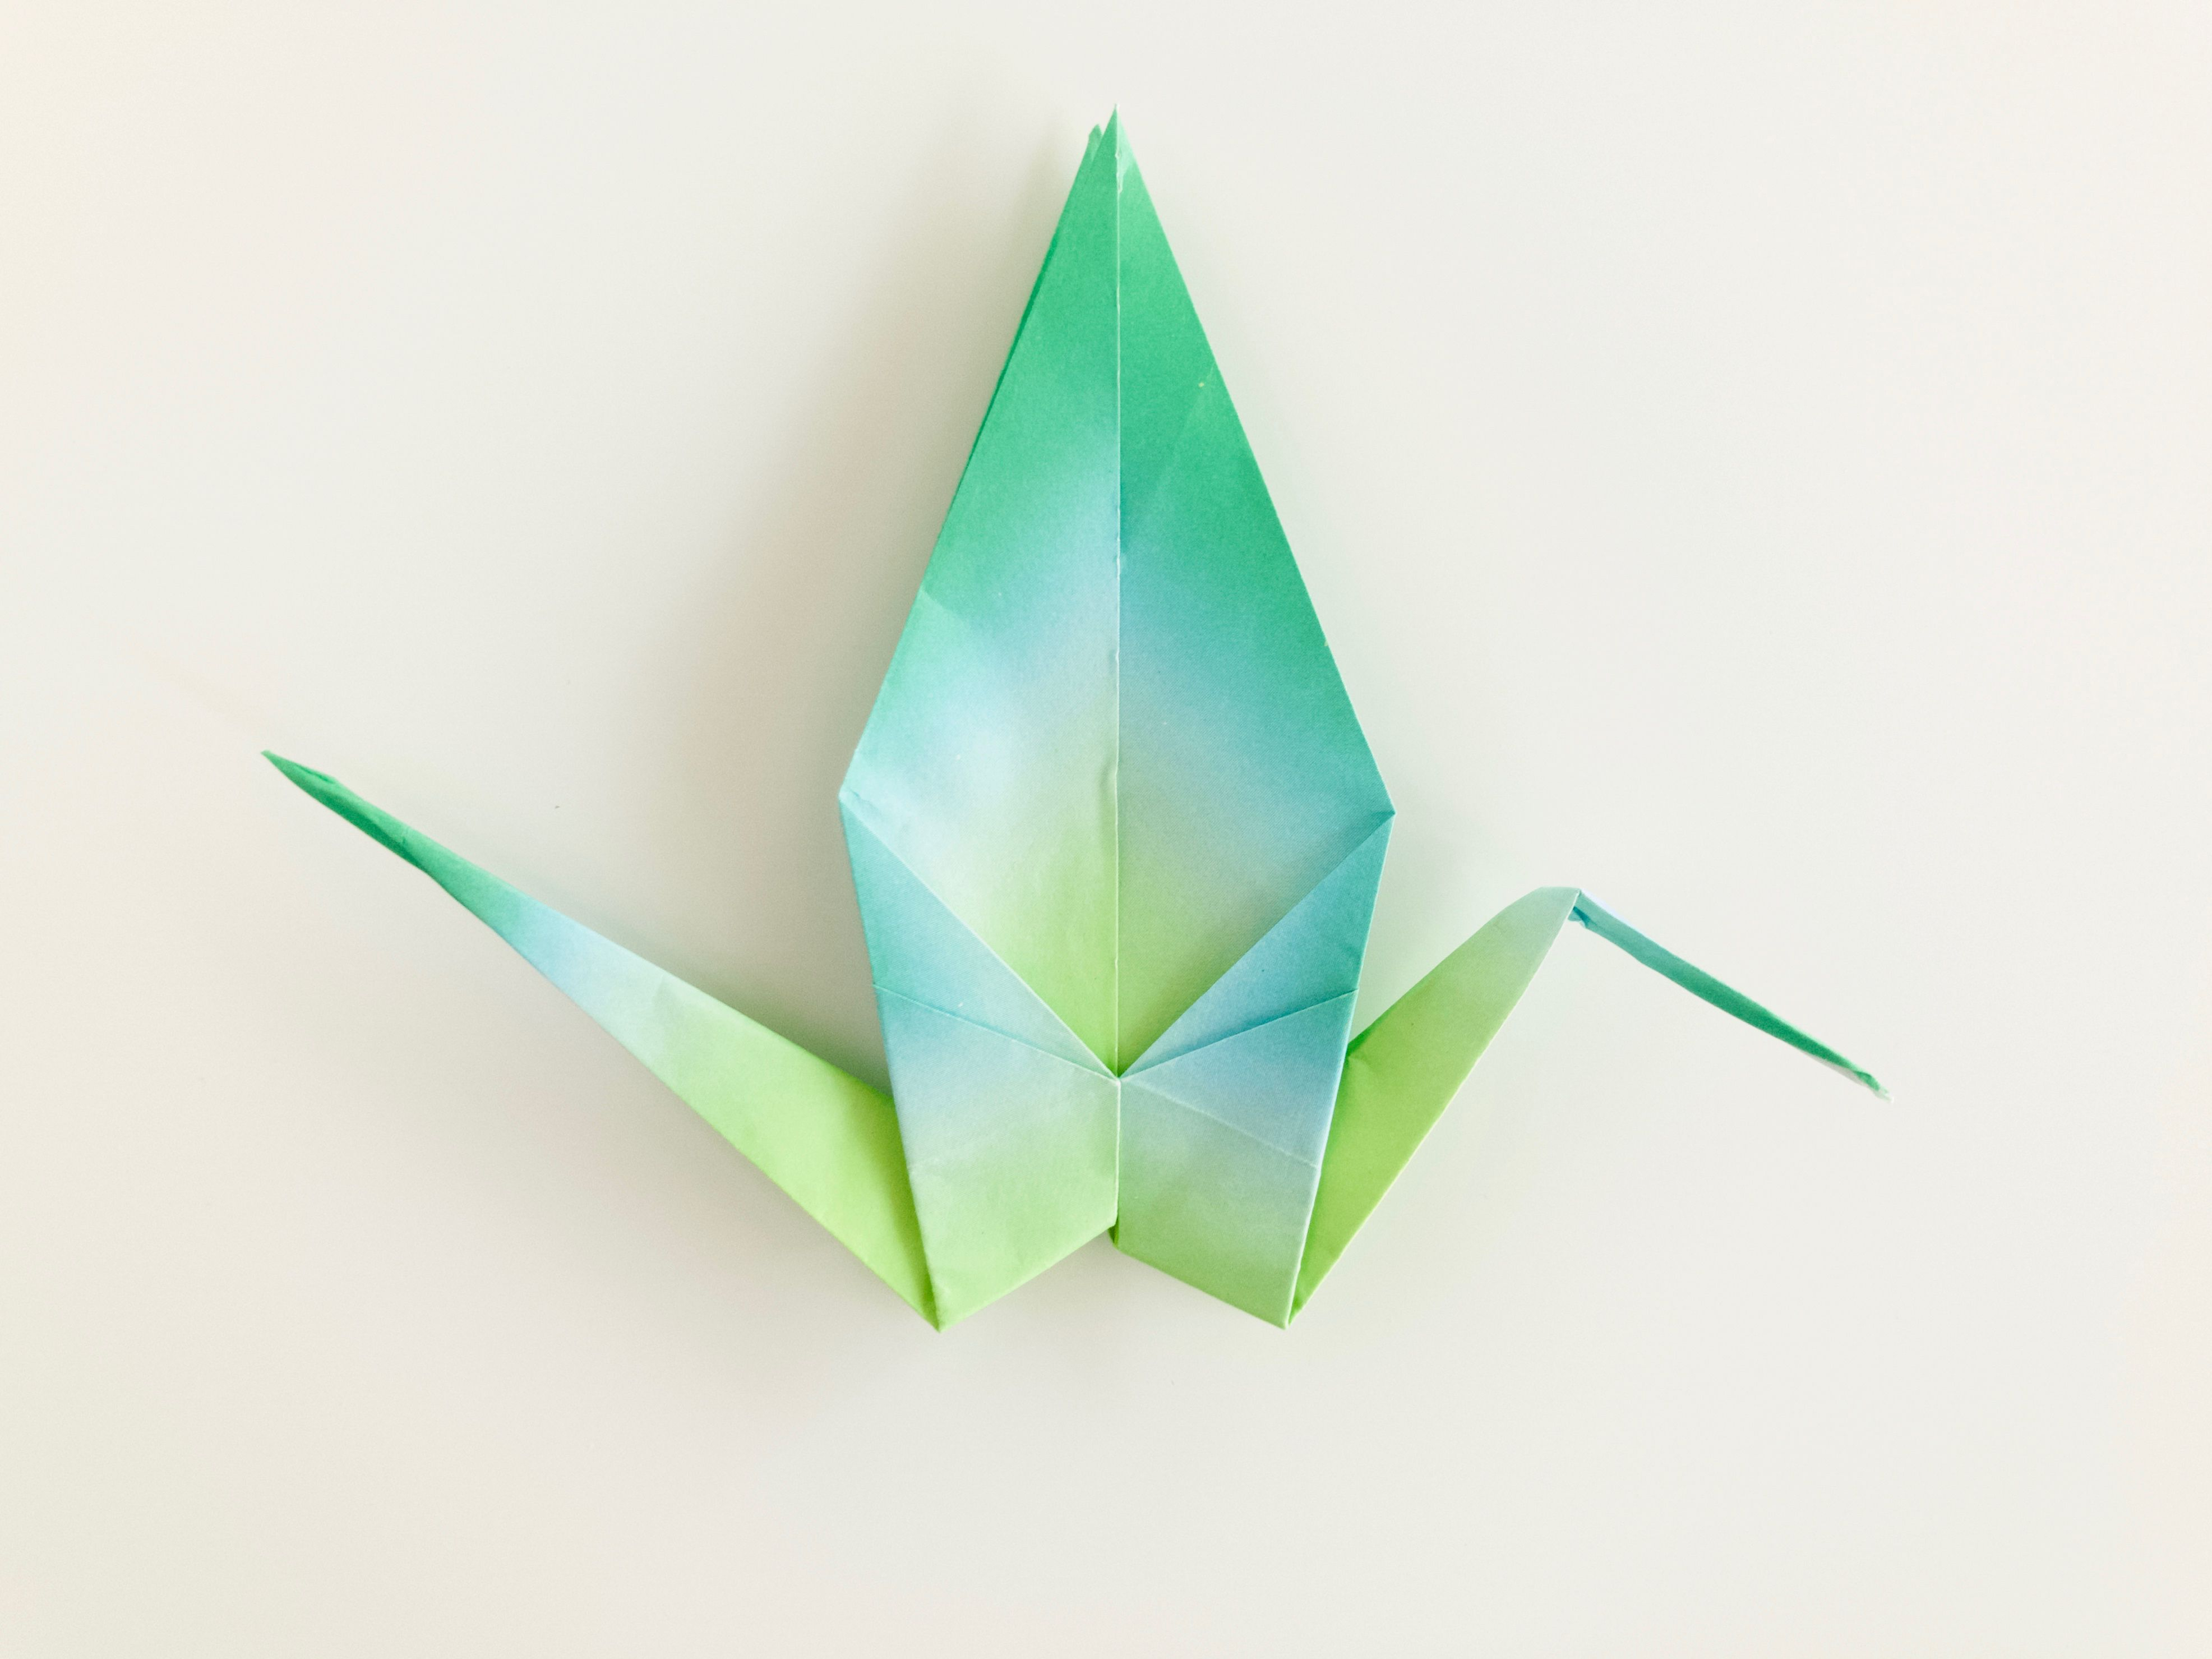 How To Make An Origami Crane Step By Step Easy Origami Crane Instructions